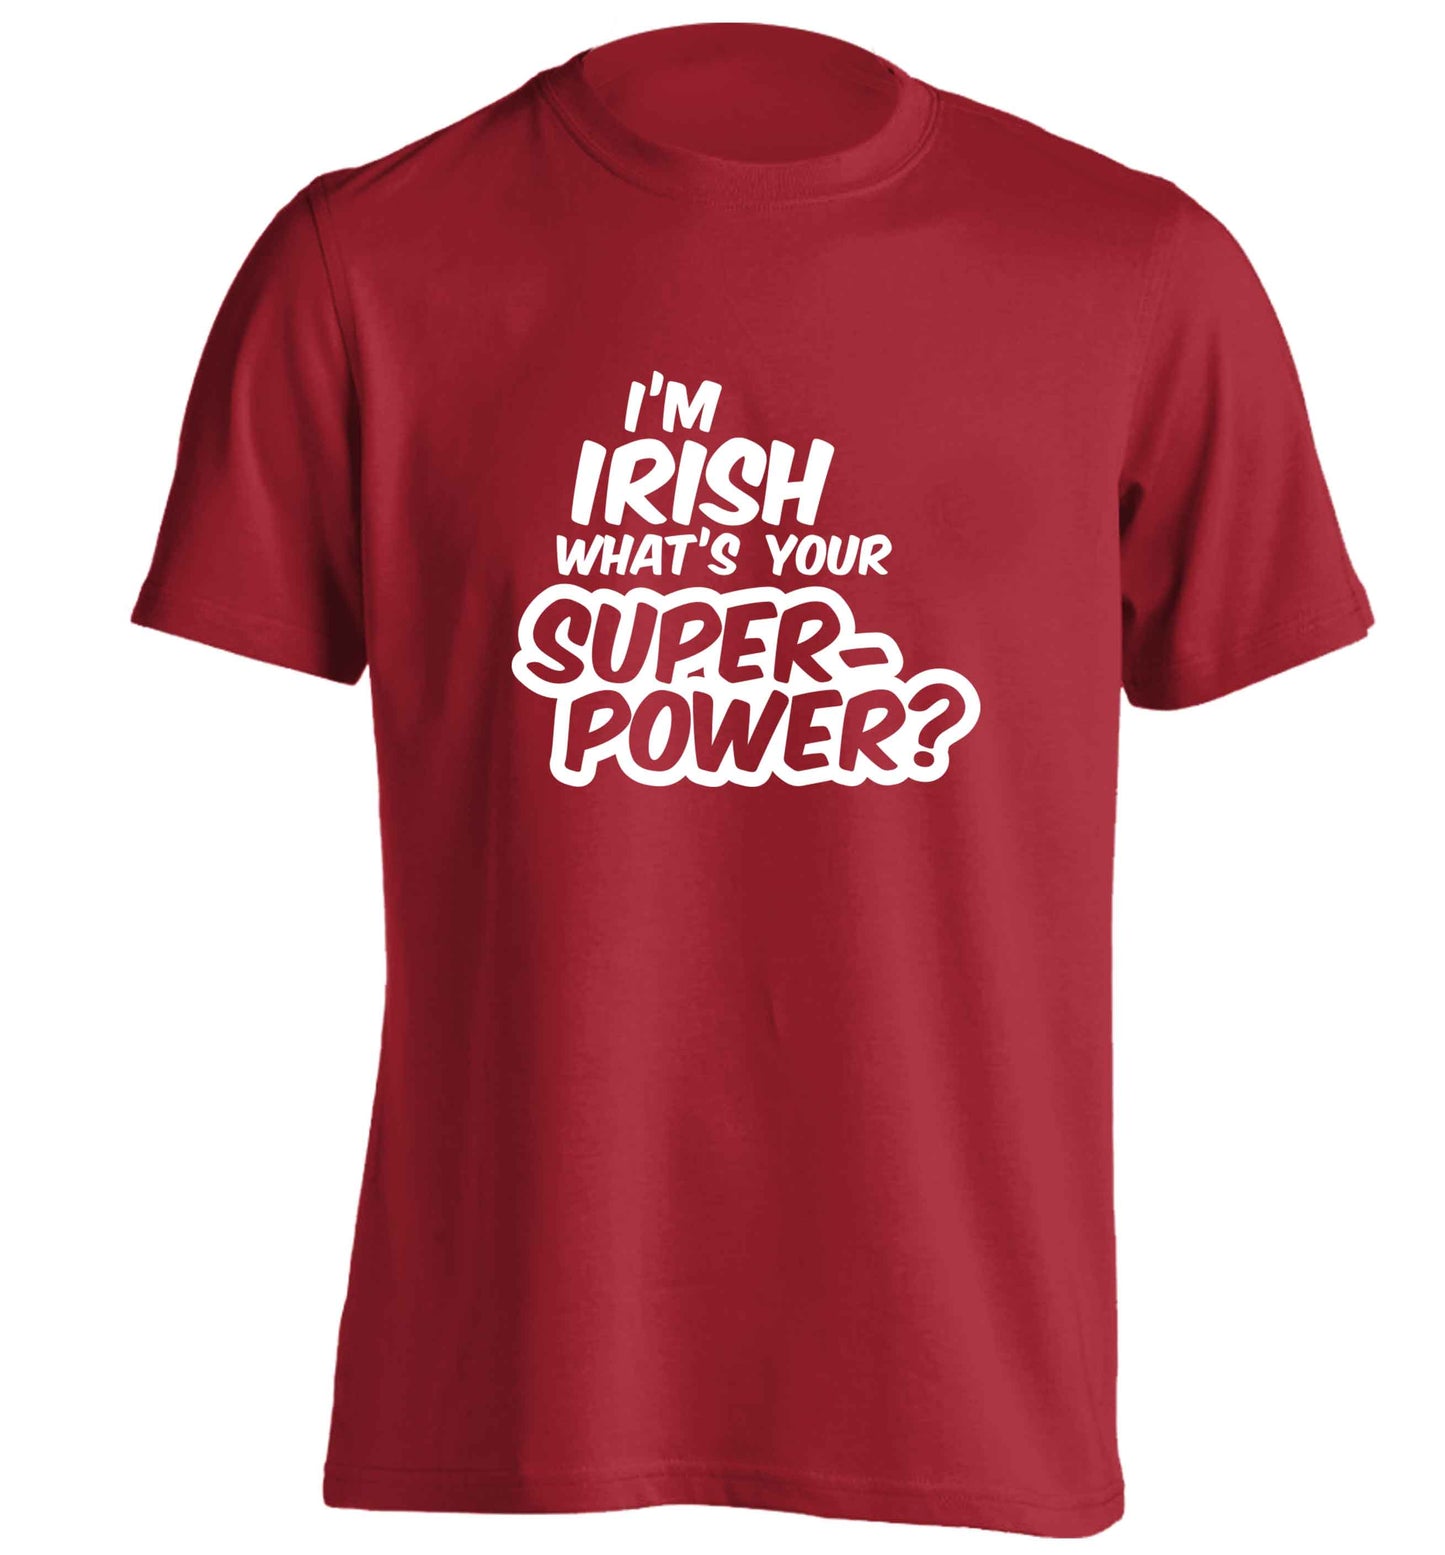 I'm Irish what's your superpower? adults unisex red Tshirt 2XL